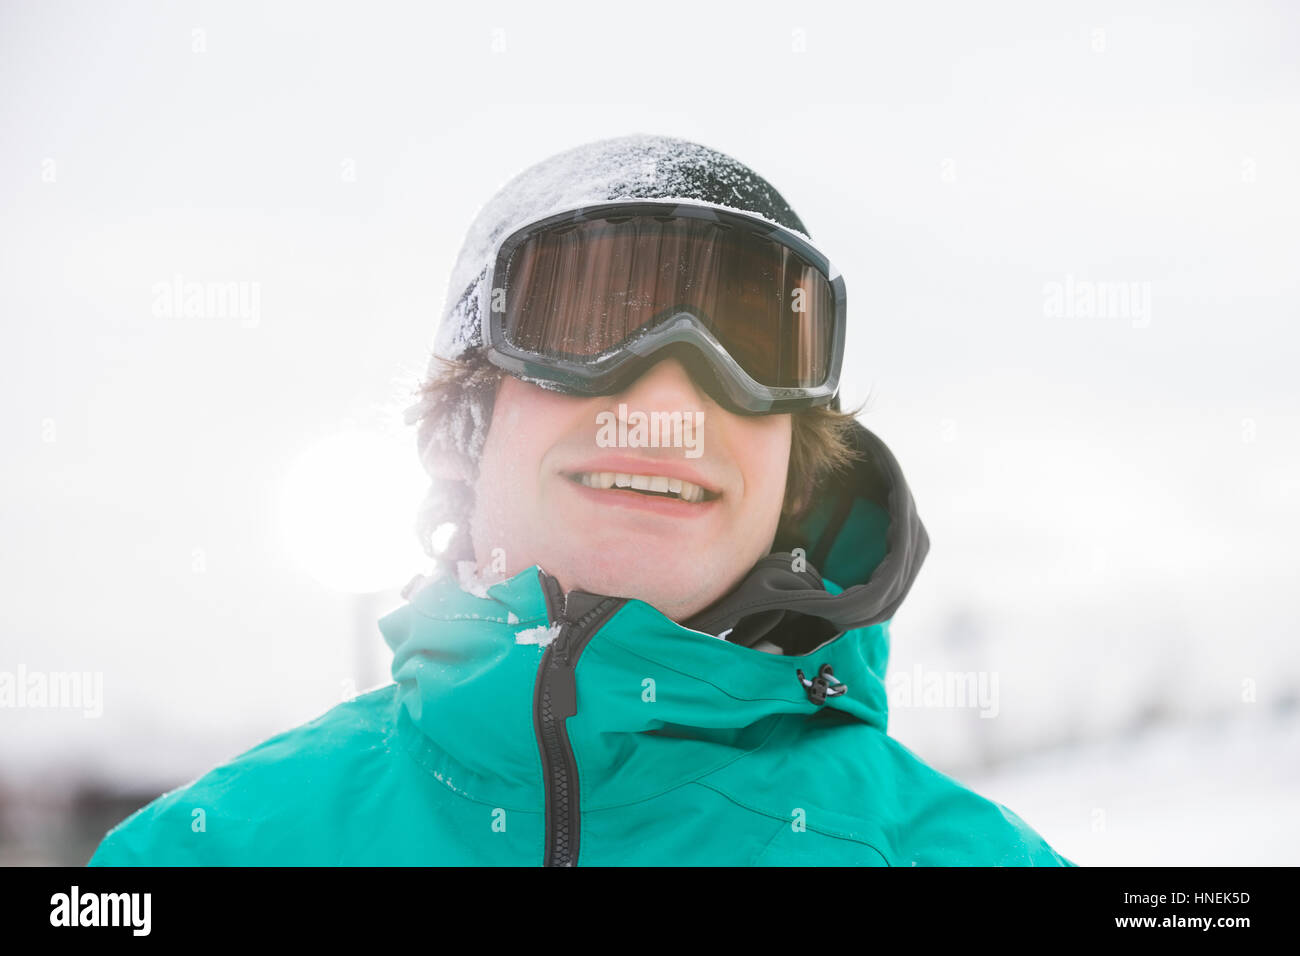 Handsome young man wearing ski goggles outdoors Stock Photo